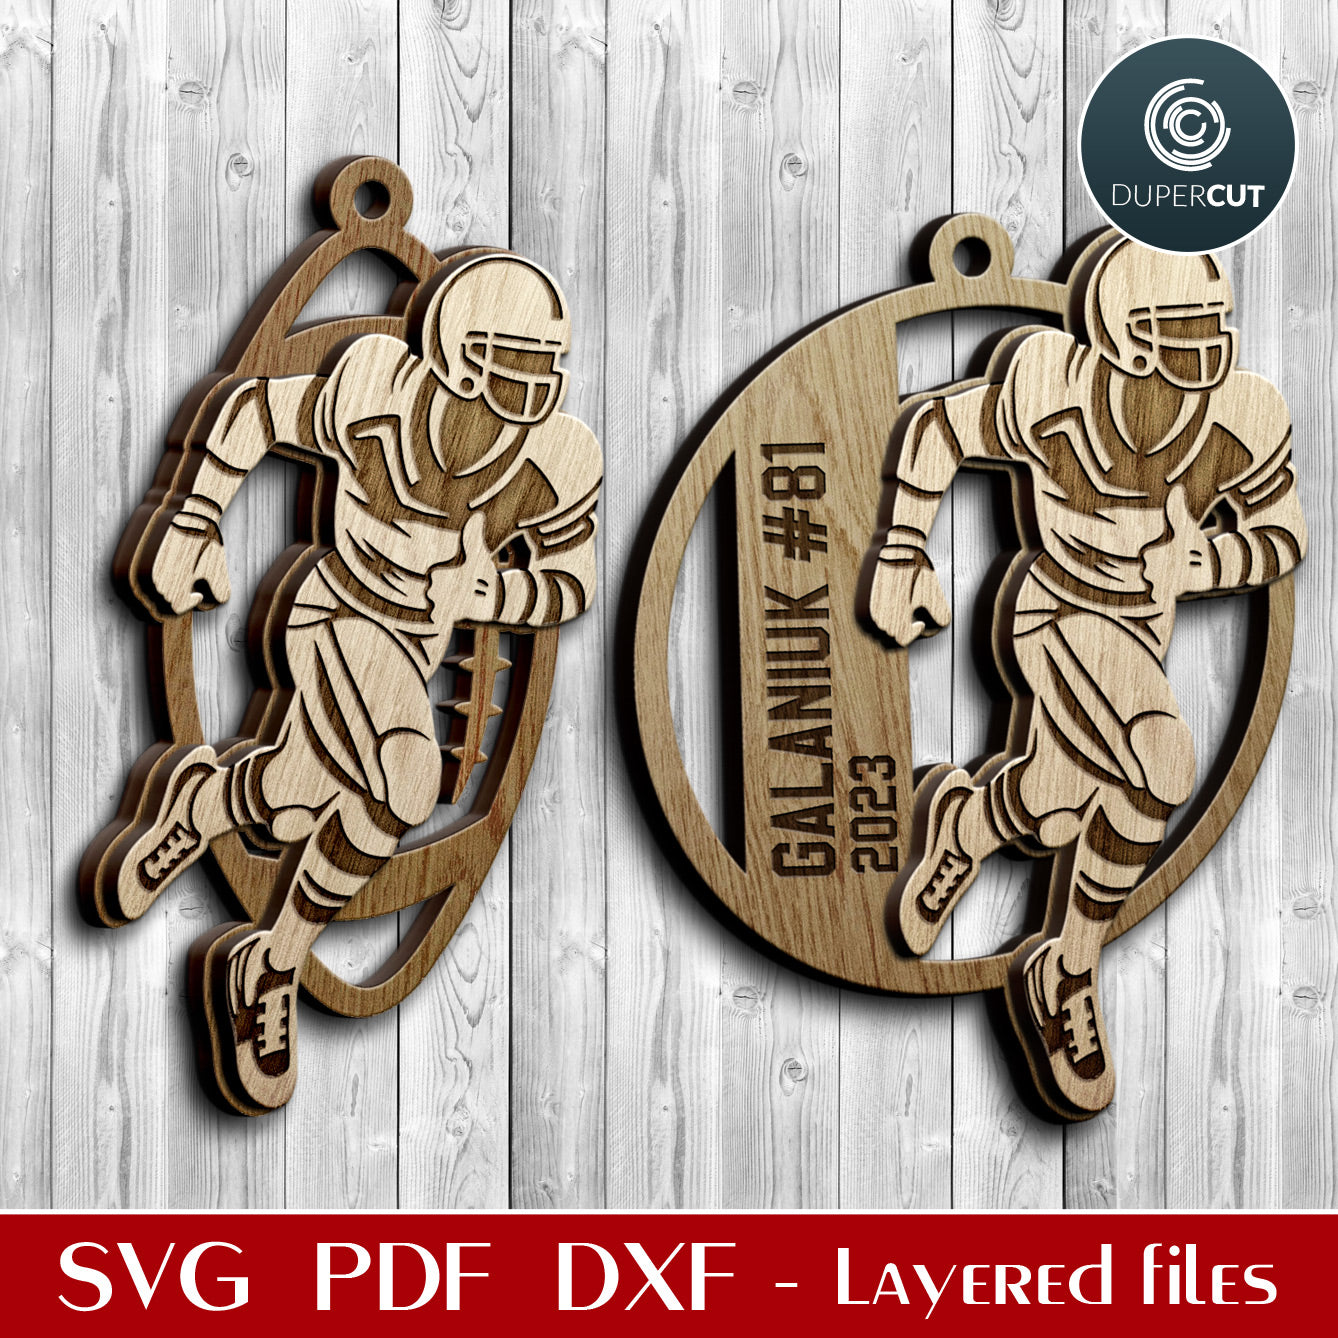 Football player ornaments layered cut files template, Christmas tree decoration SVG files for Glowforge, Xtool, CNC laser machines, Cricut, by www.DuperCut.com